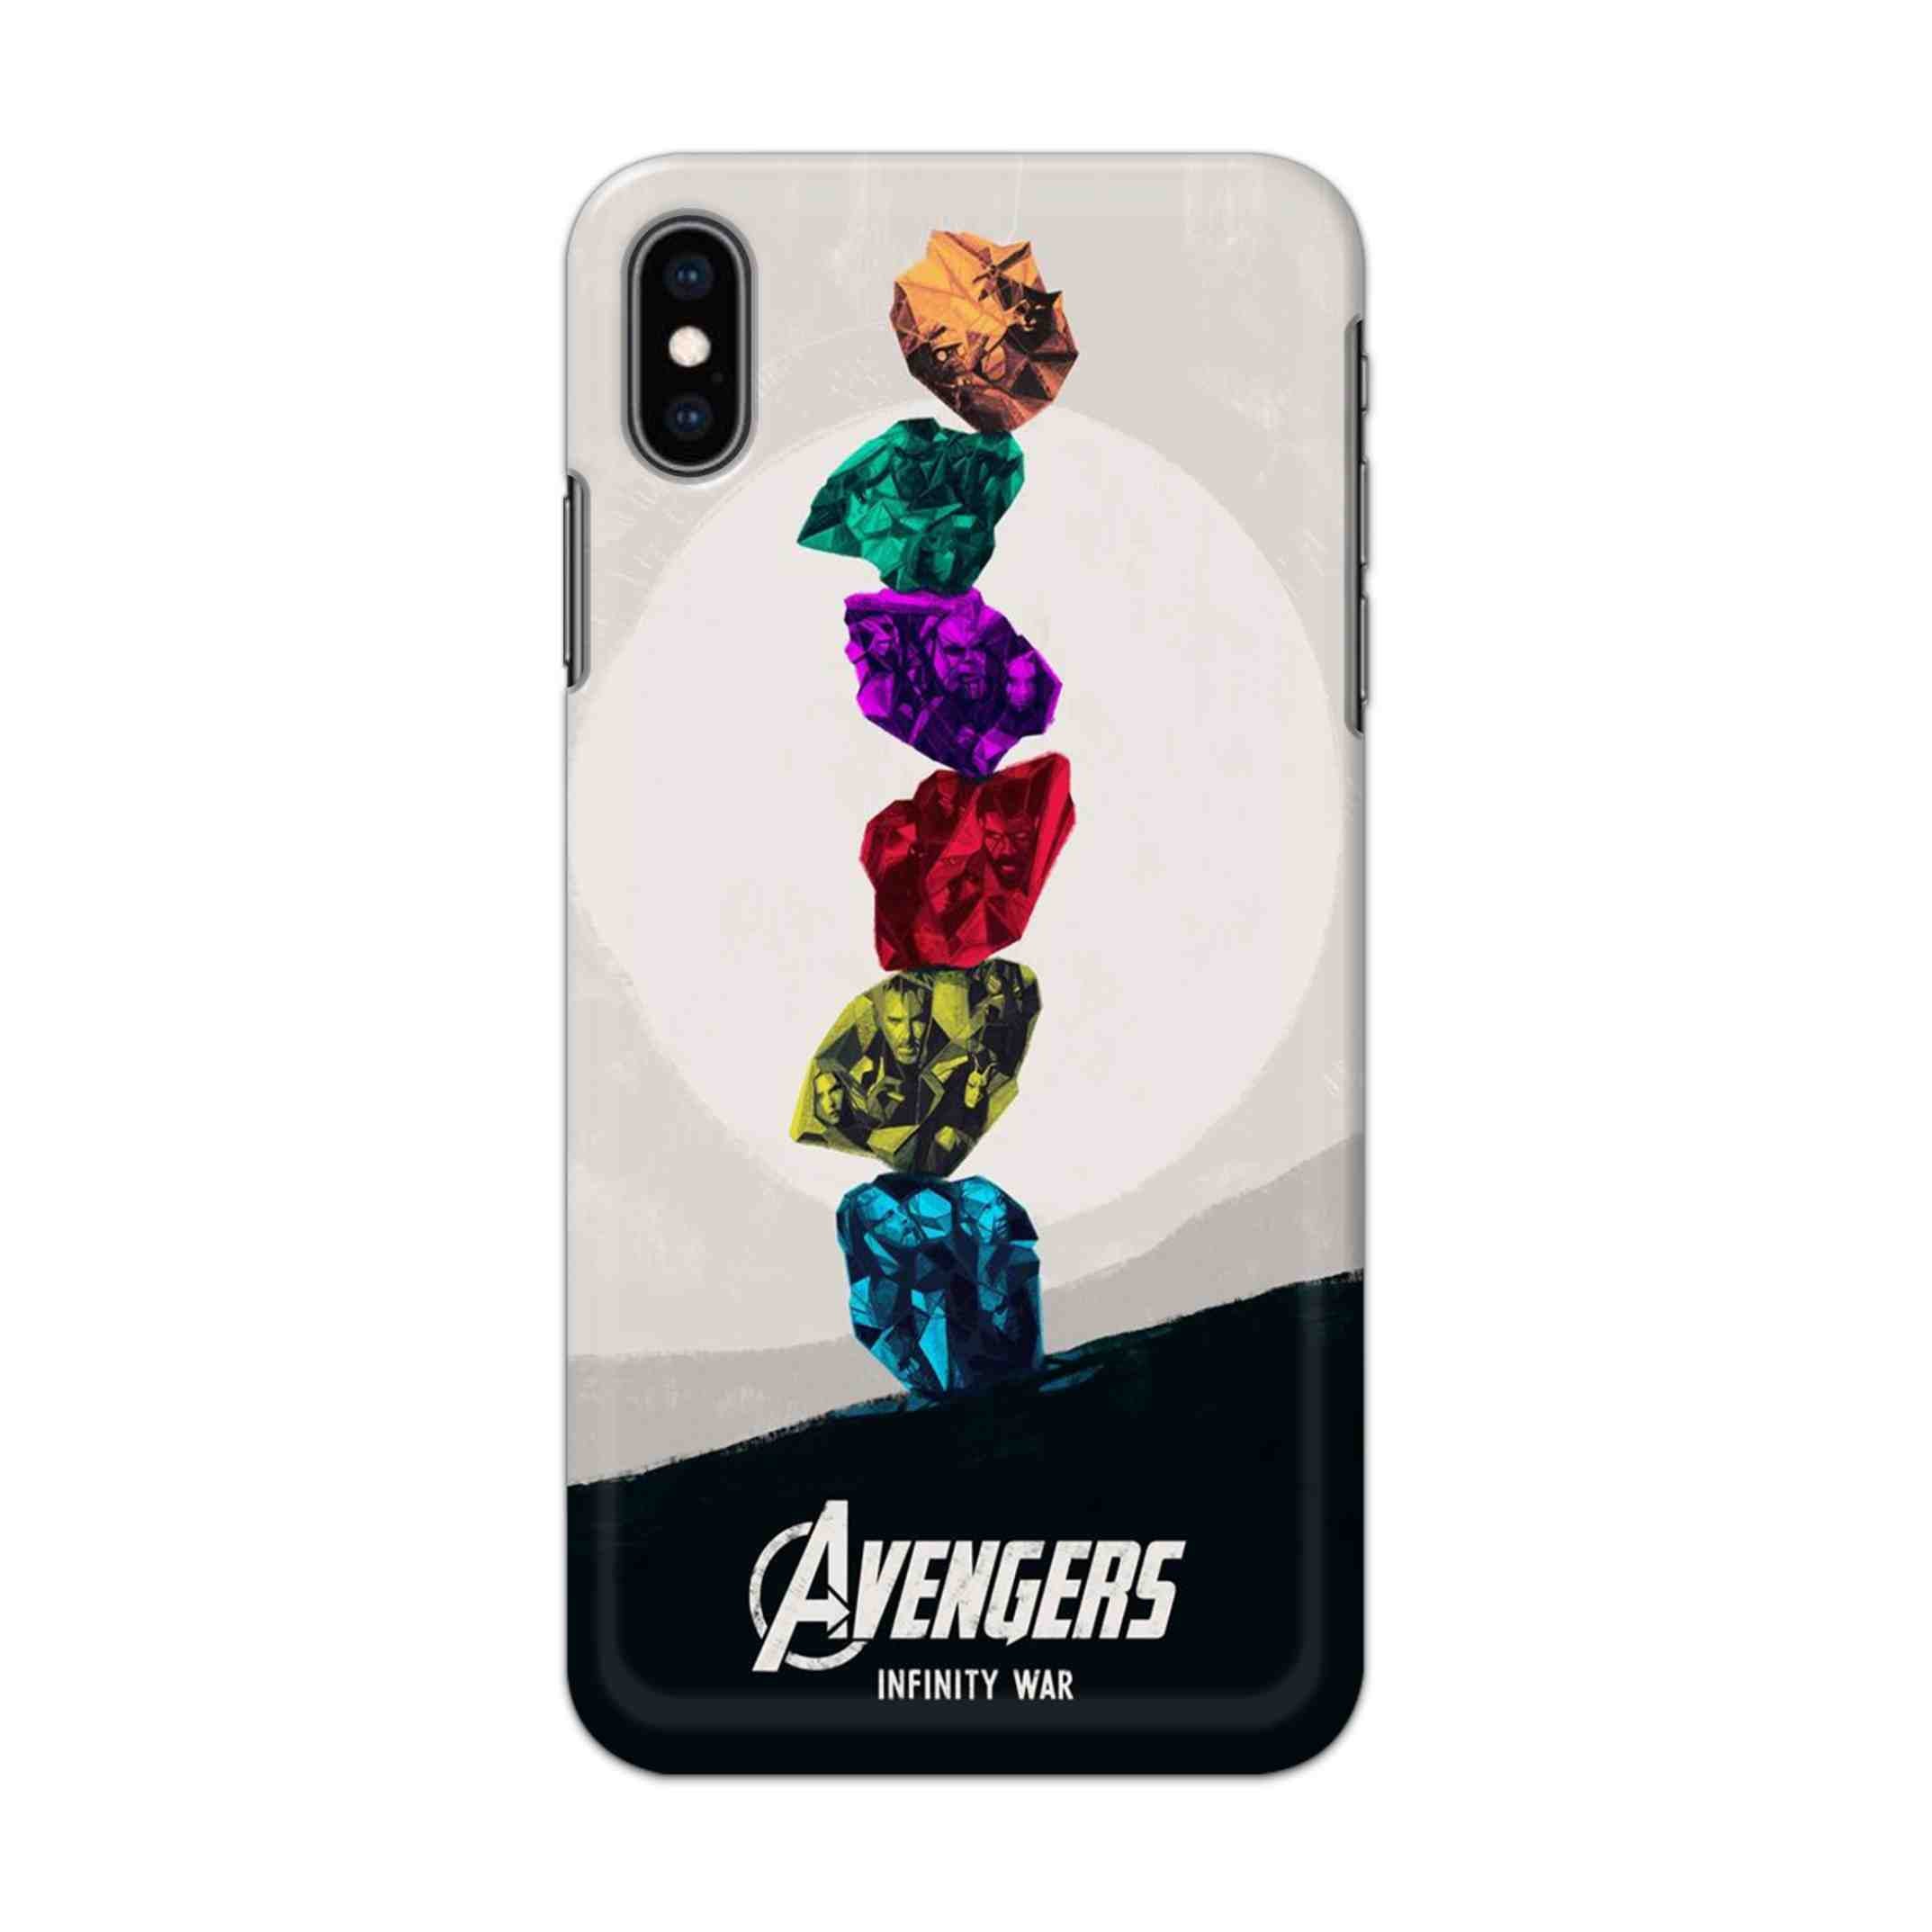 Buy Avengers Stone Hard Back Mobile Phone Case/Cover For iPhone XS MAX Online